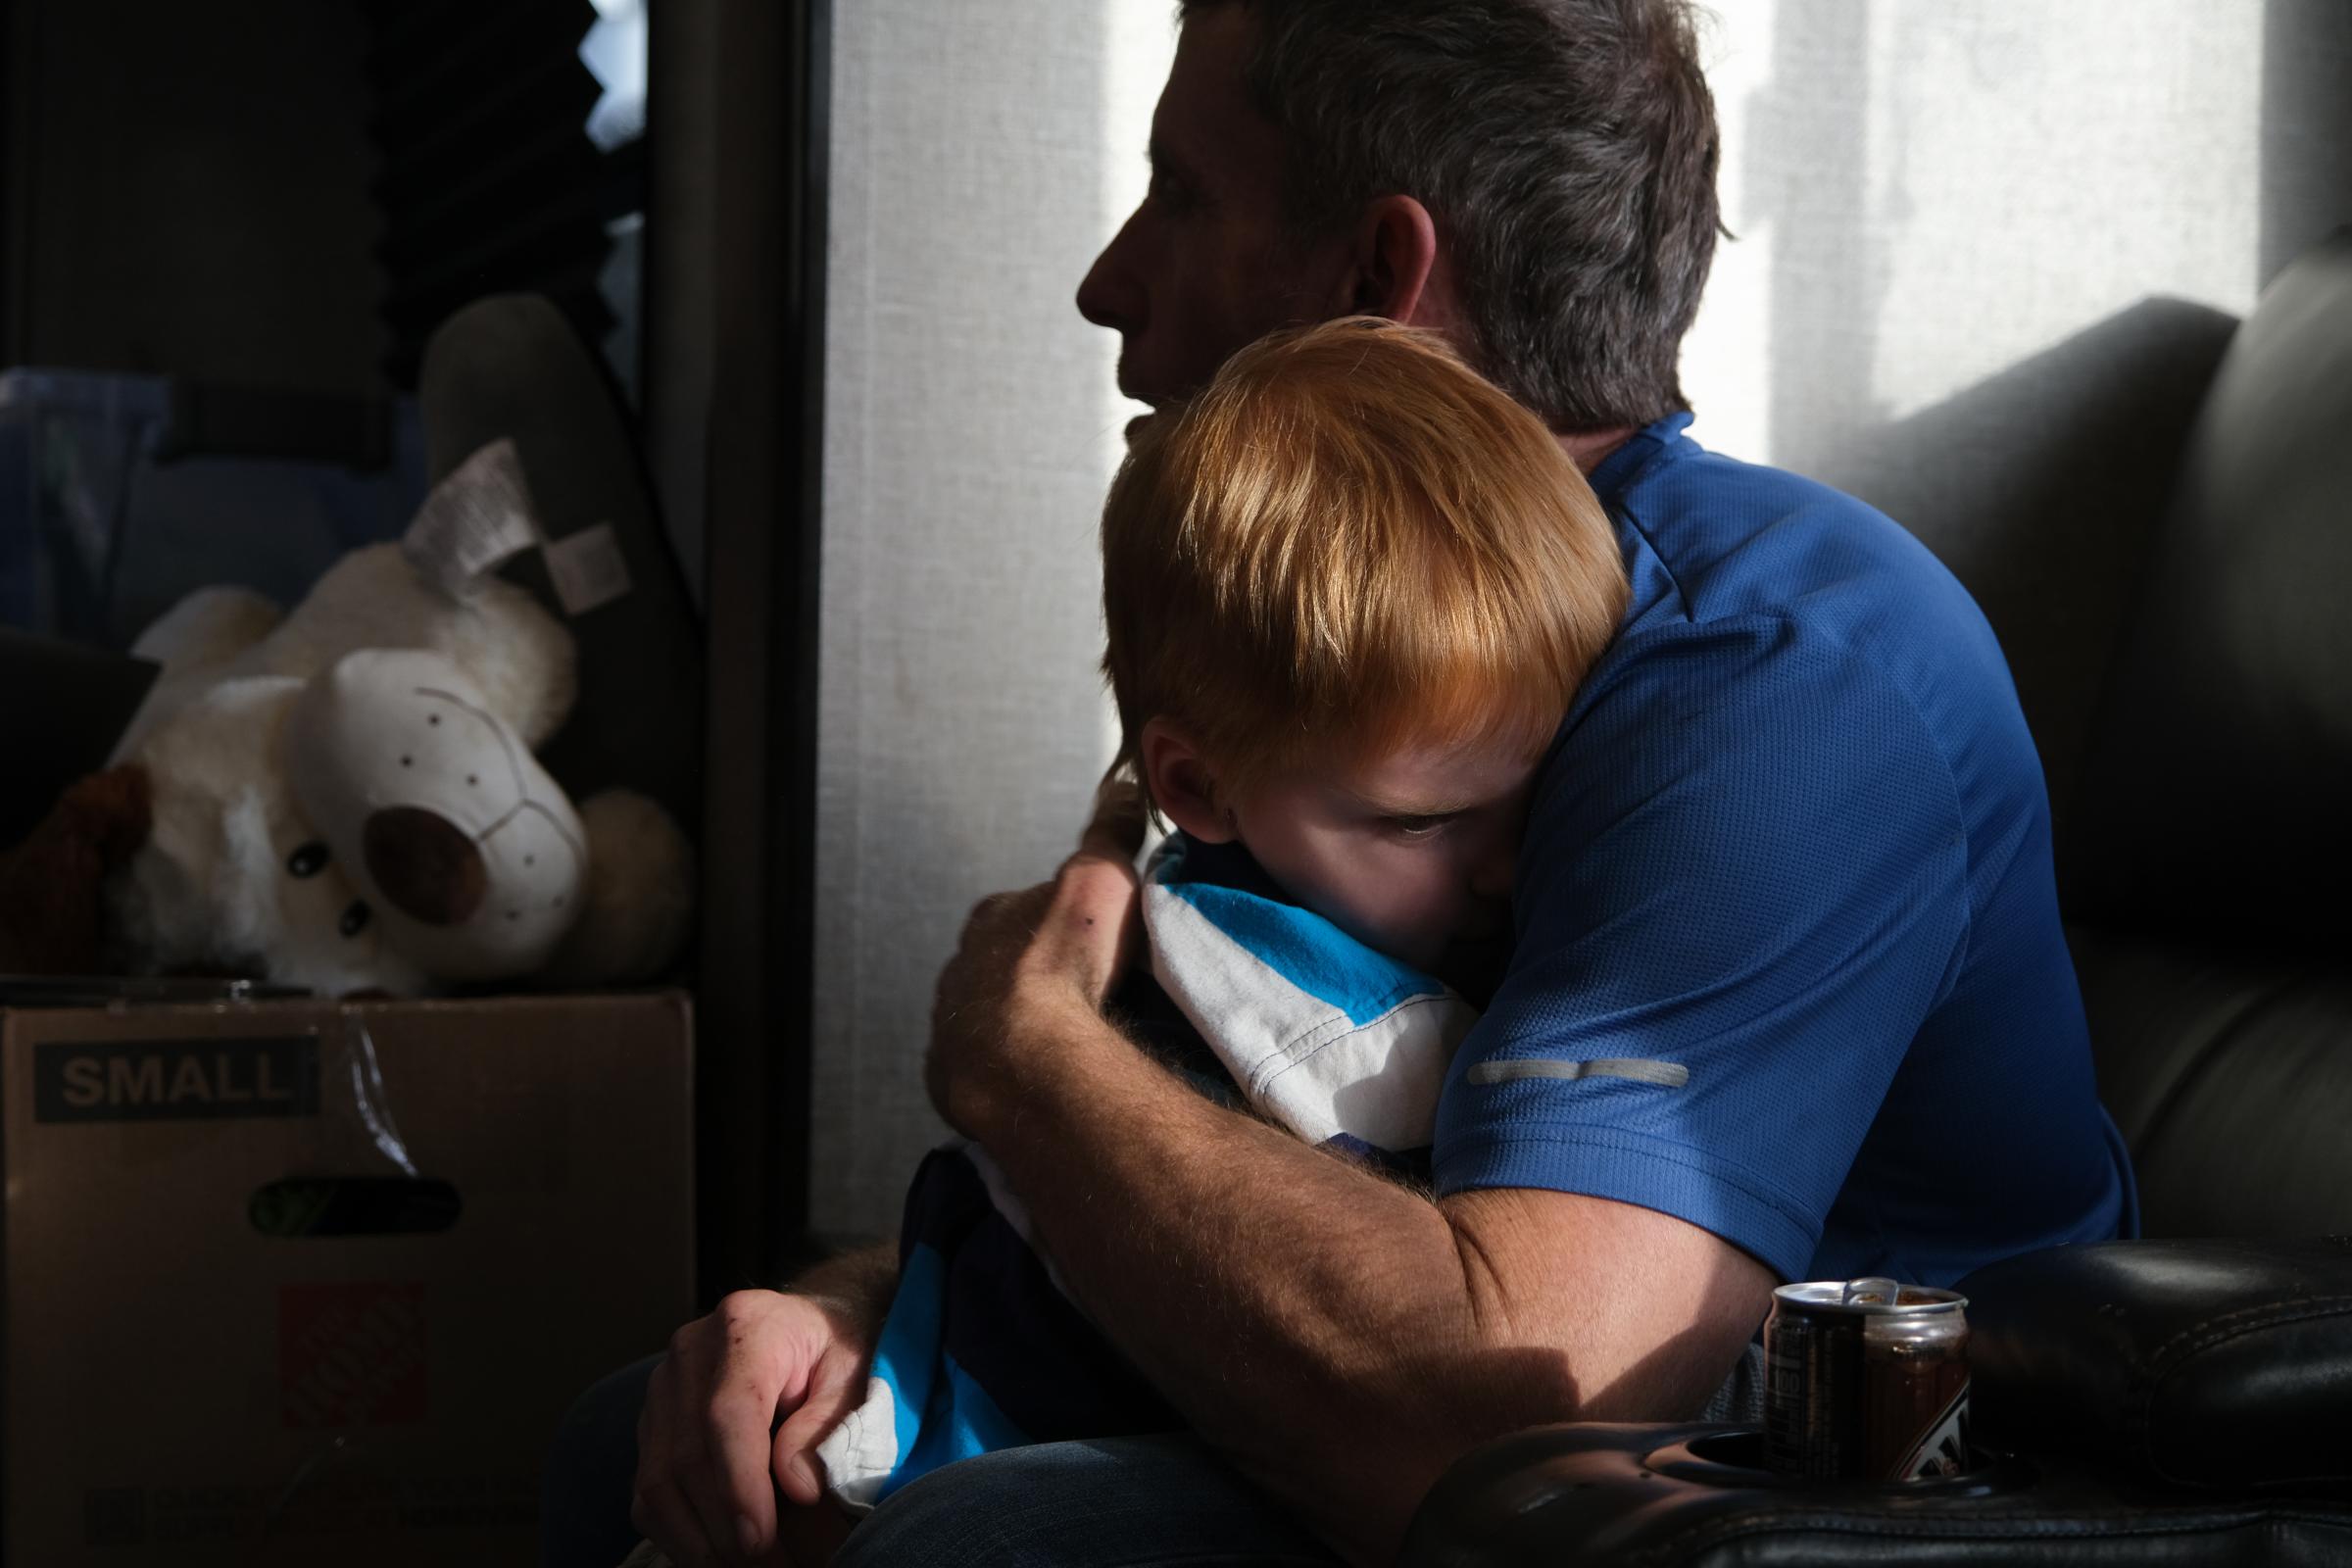 Floyd Bledsoe comforts his son Bryce at their home in Hutchinson, Kansas, USA on January 15, 2022. Assignment code 20220115InnocentMan Hutchinson USA